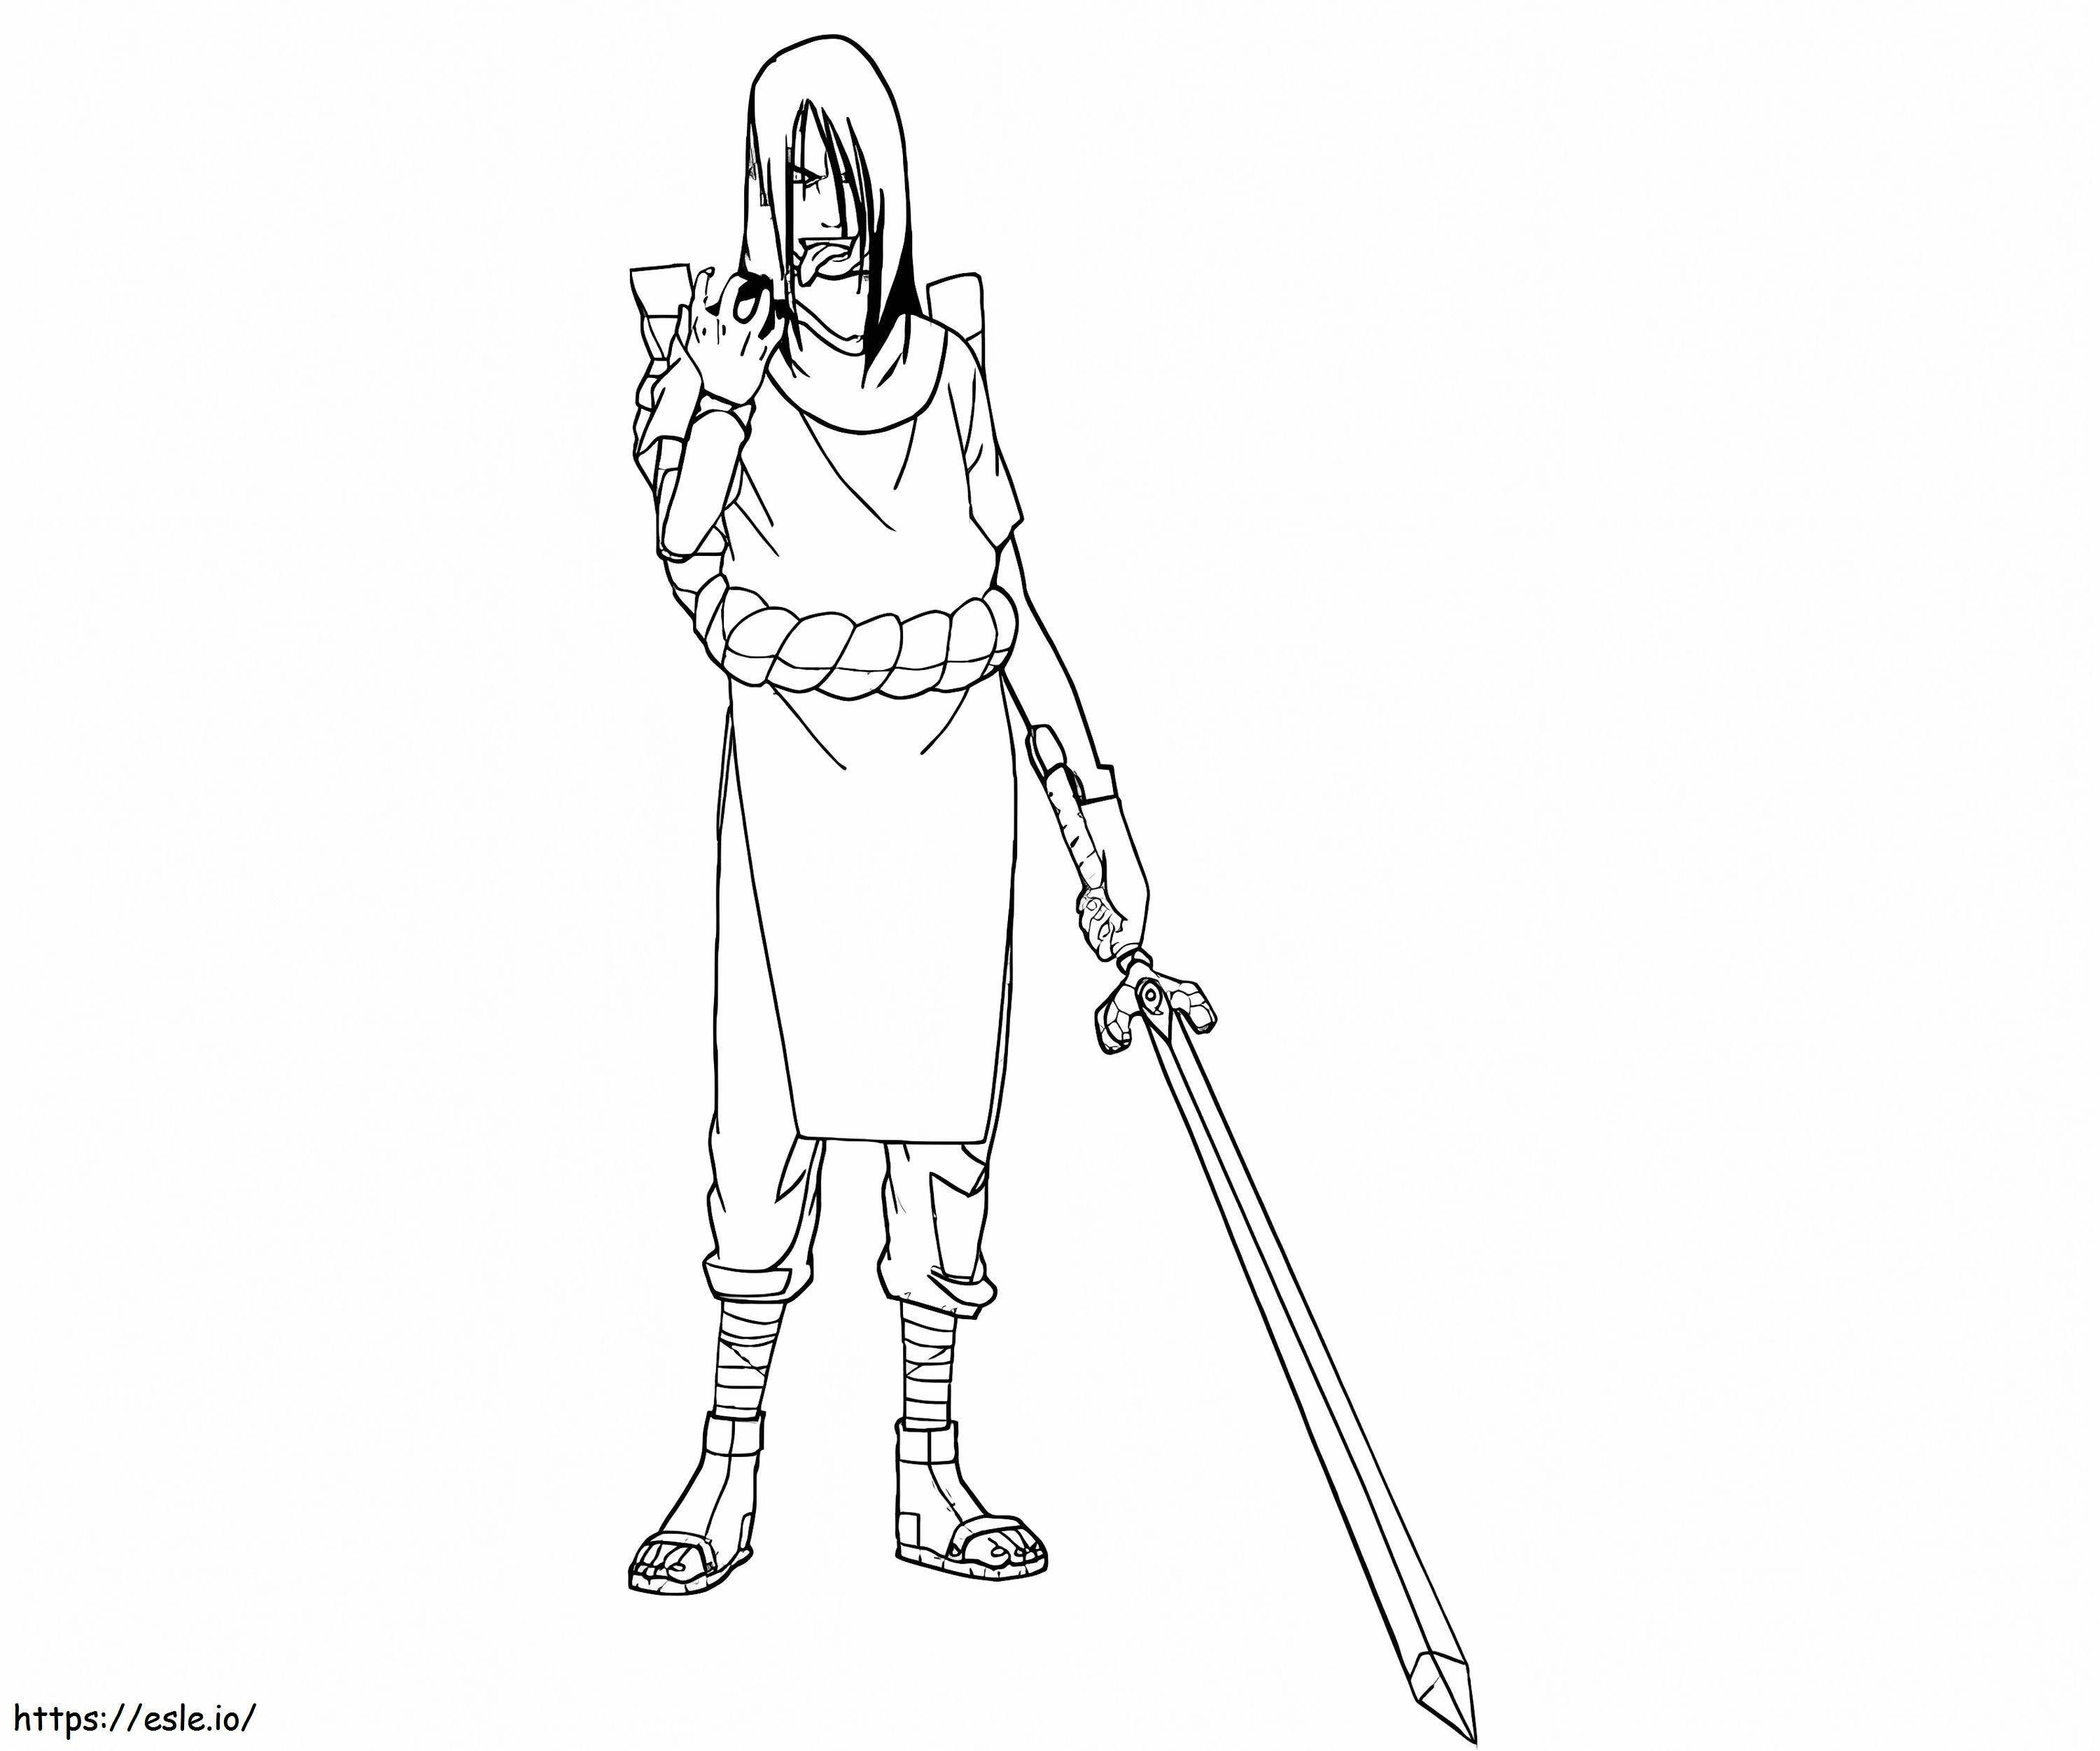 Orochimaru Holding The Sword coloring page